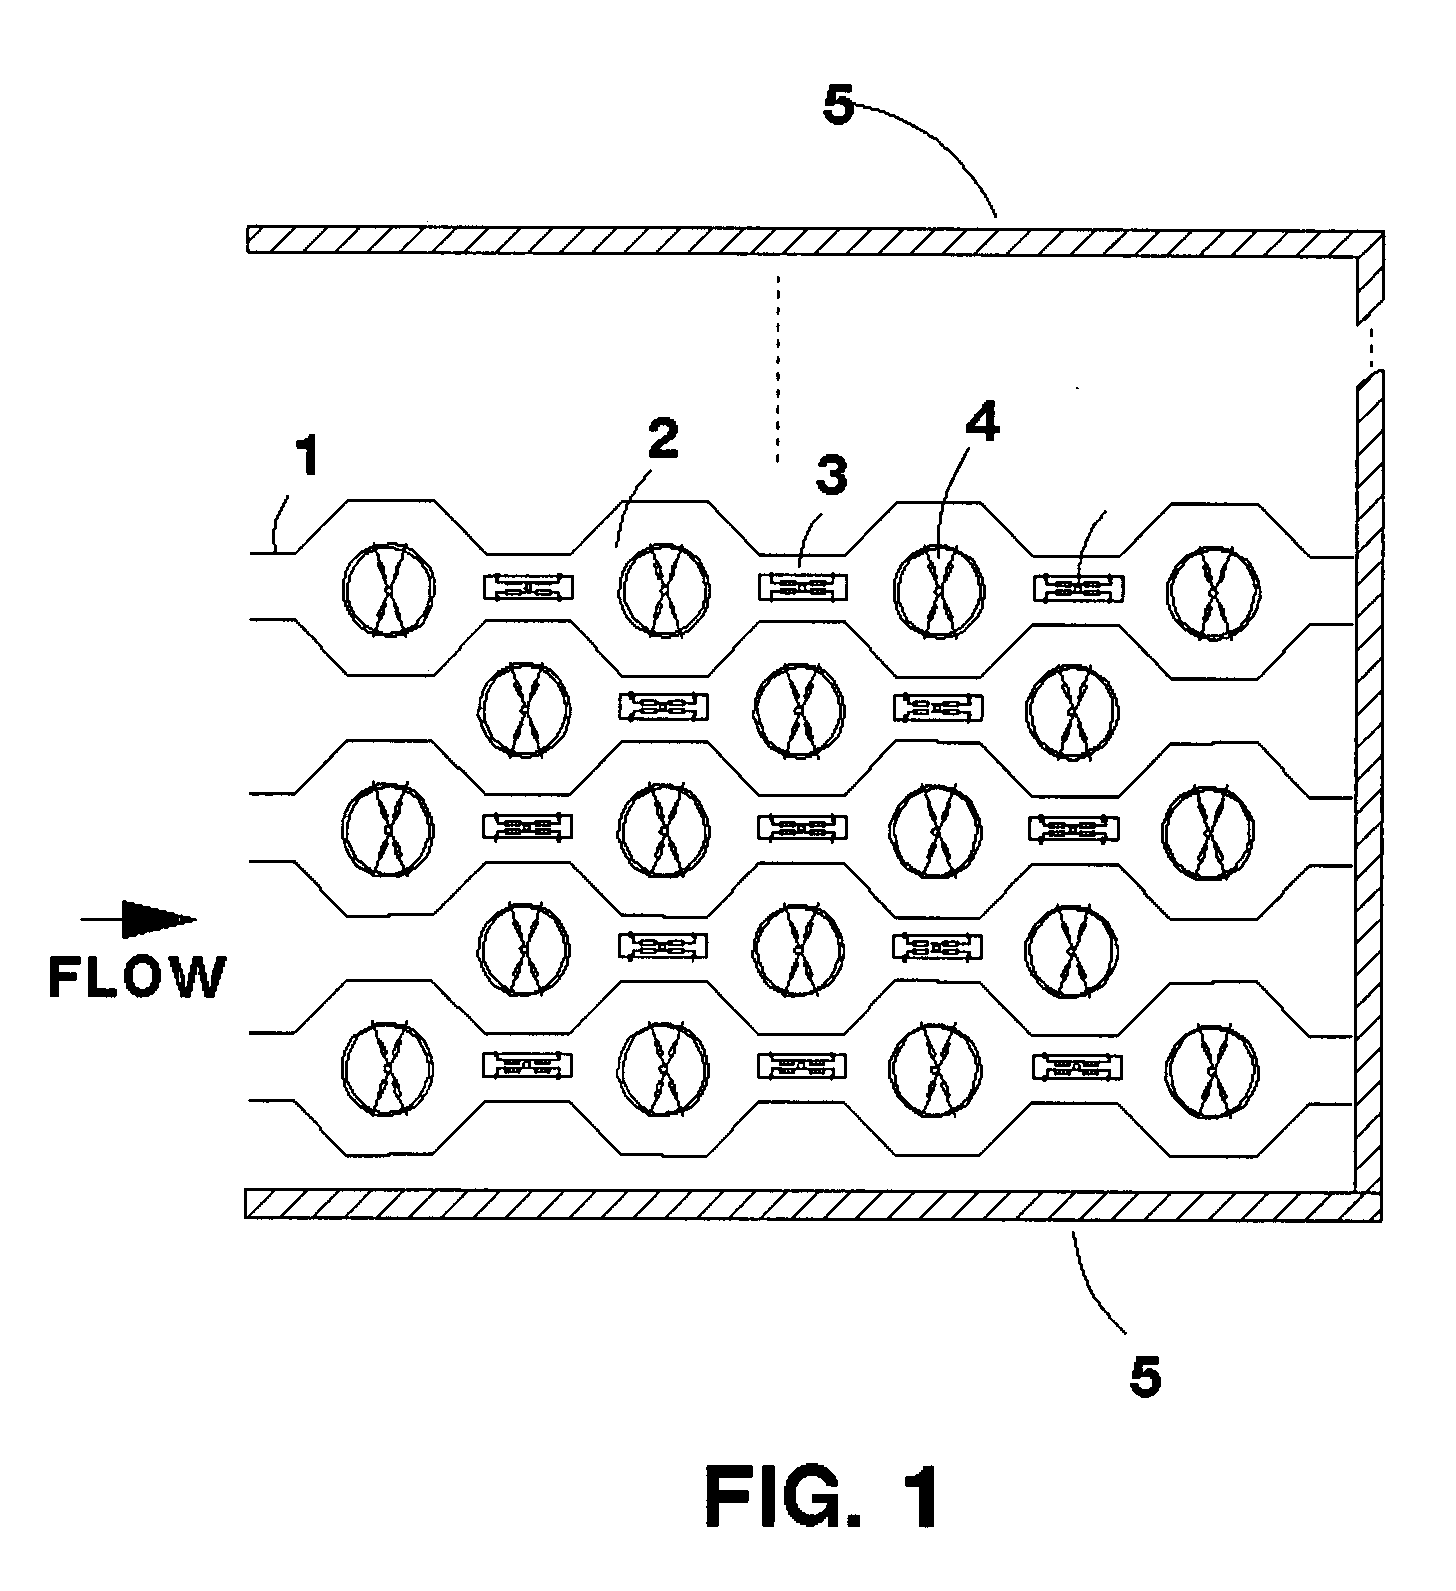 Multi-stage collector for multi-pollutant control